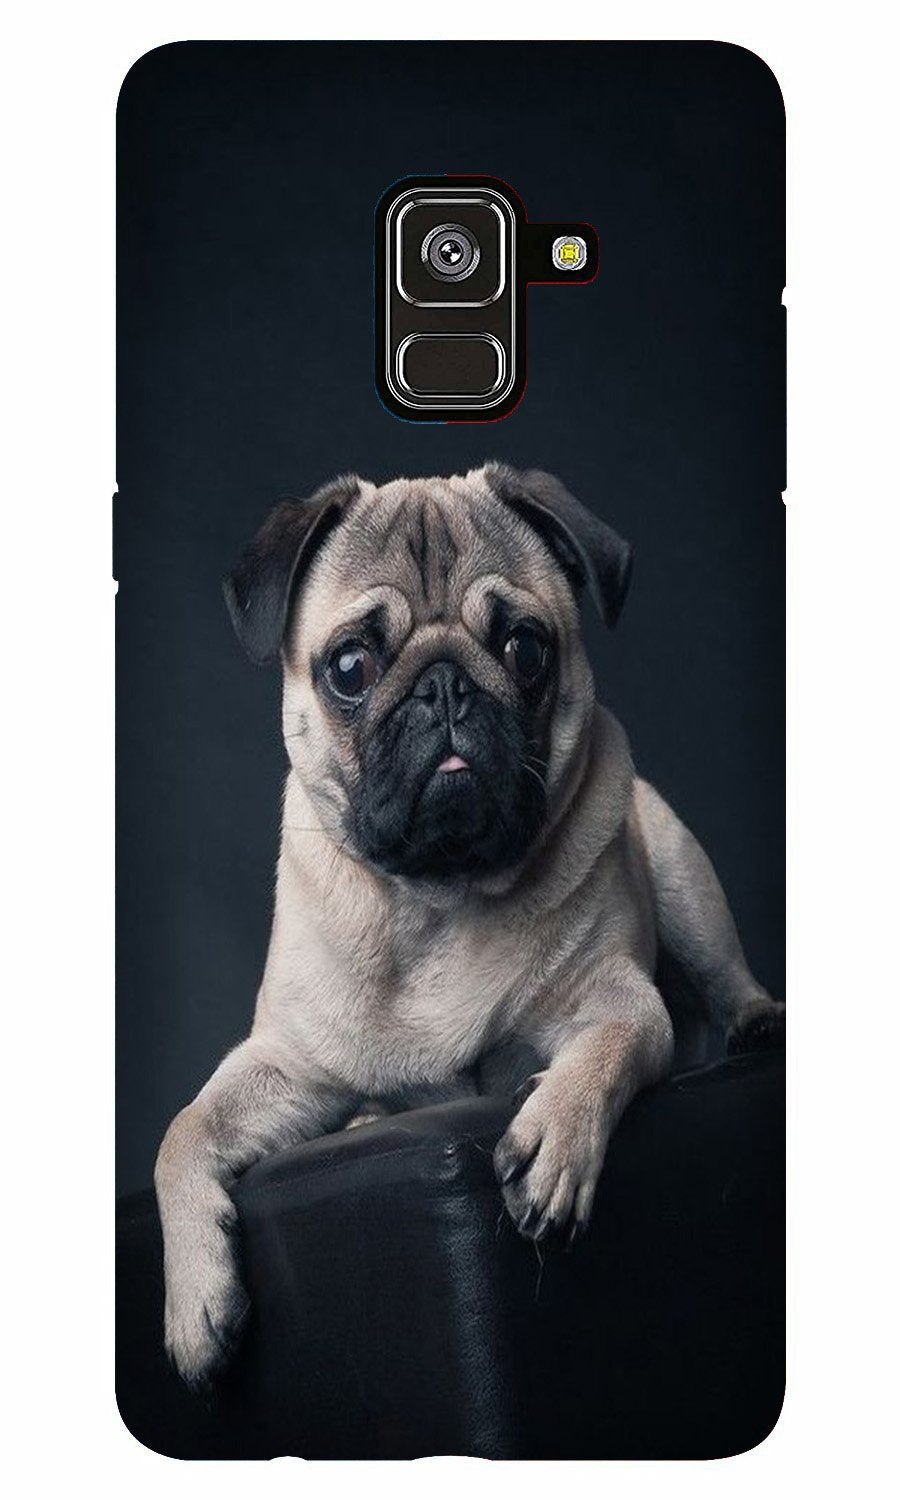 little Puppy Case for Galaxy A5 (2018)